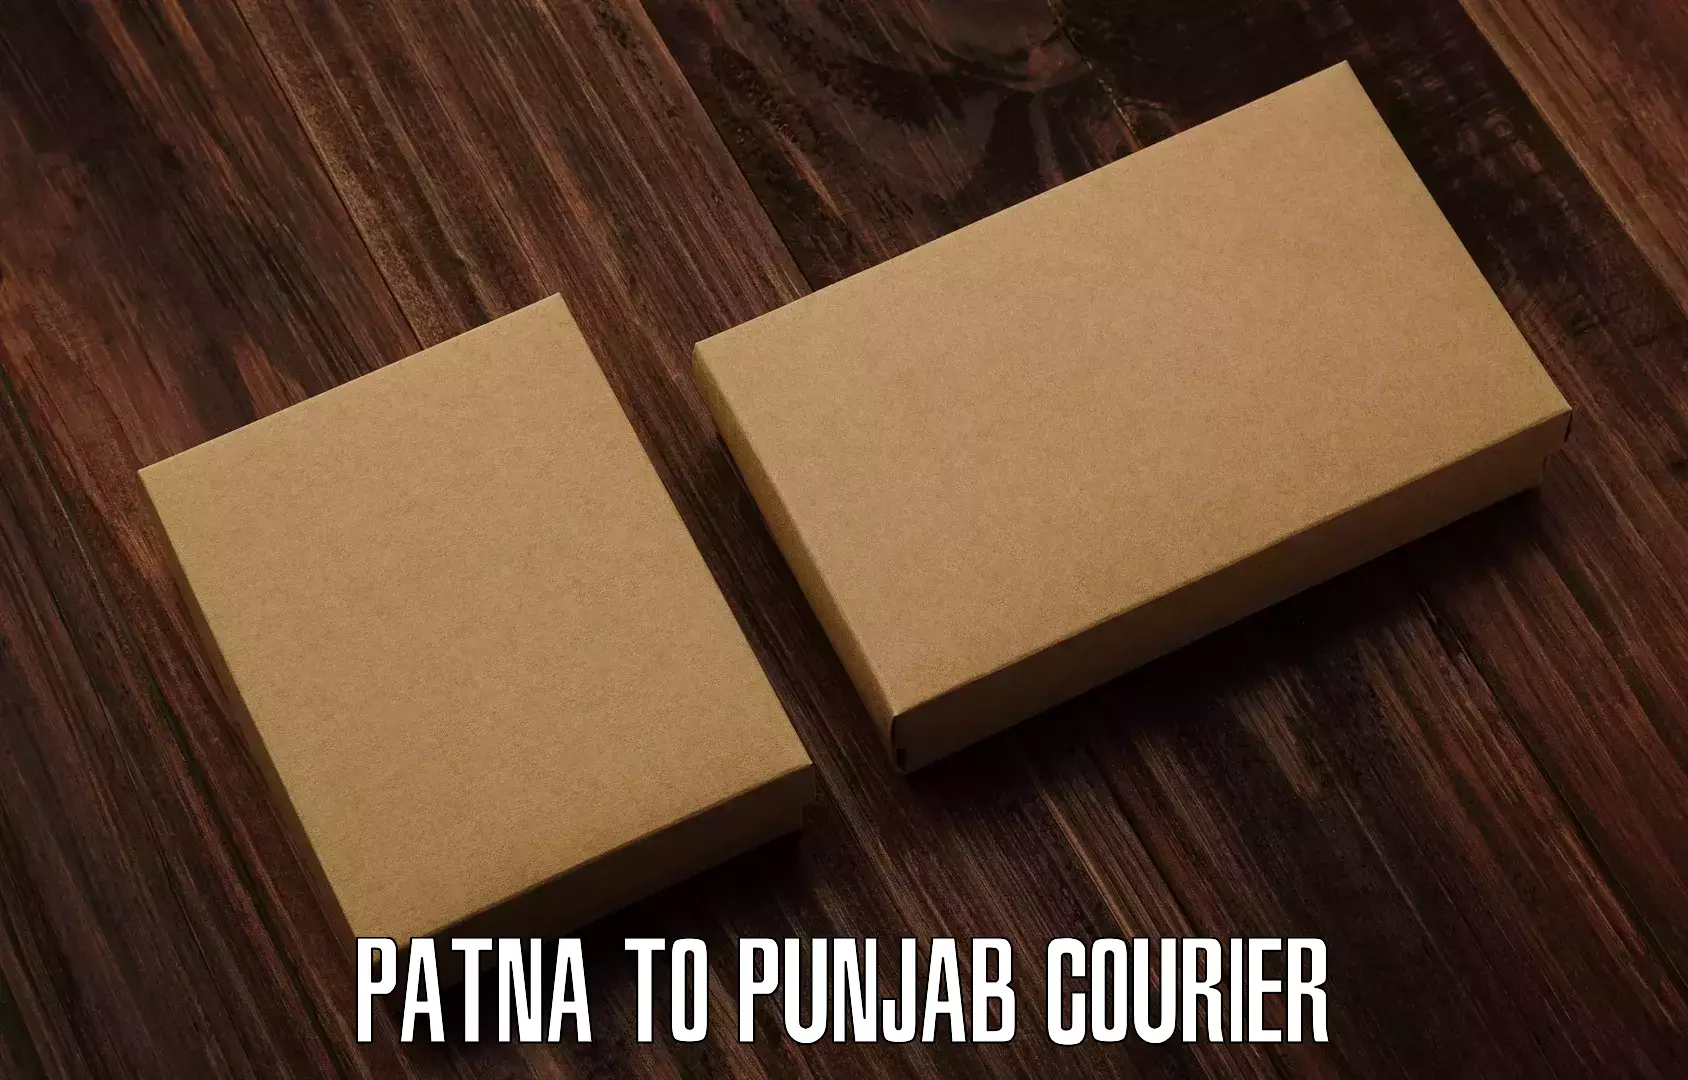 Express delivery solutions Patna to Punjab